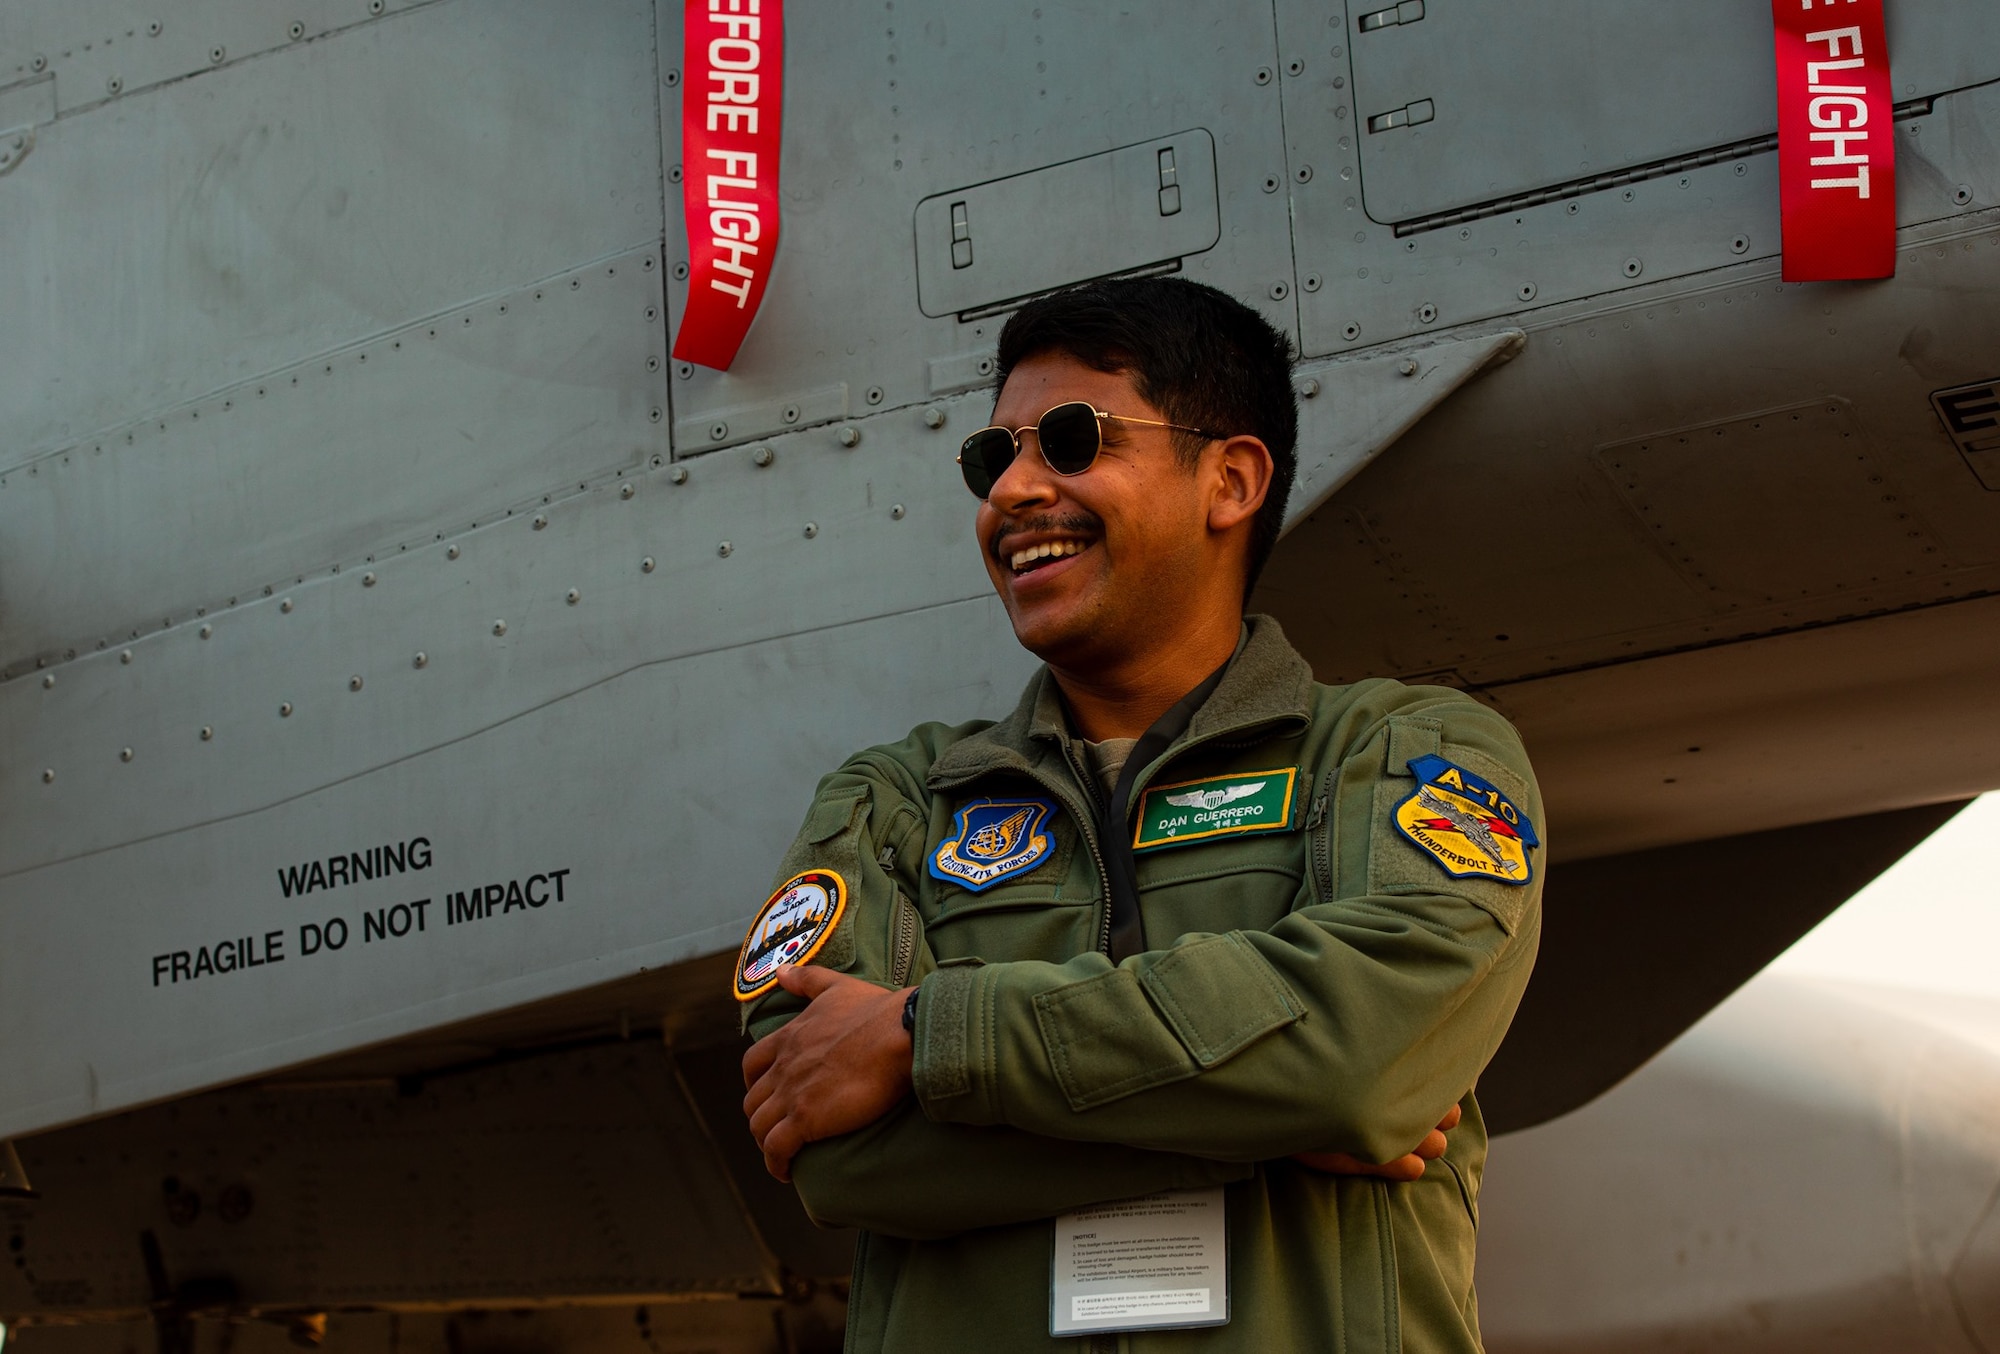 1st Lt. Daniel Guerrero, 25th Fighter Wing Squadron A-10 Thunderbolt II pilot, stands with the A-10 static display at the Seoul International Aerospace and Defense Exhibition, also known as Seoul ADEX 21, Oct. 21, 2021. Seoul ADEX 21 is the largest, most comprehensive event of its kind in Northeast Asia, attracting aviation, aerospace professionals, key defense personnel, aviation enthusiasts and the general public alike.